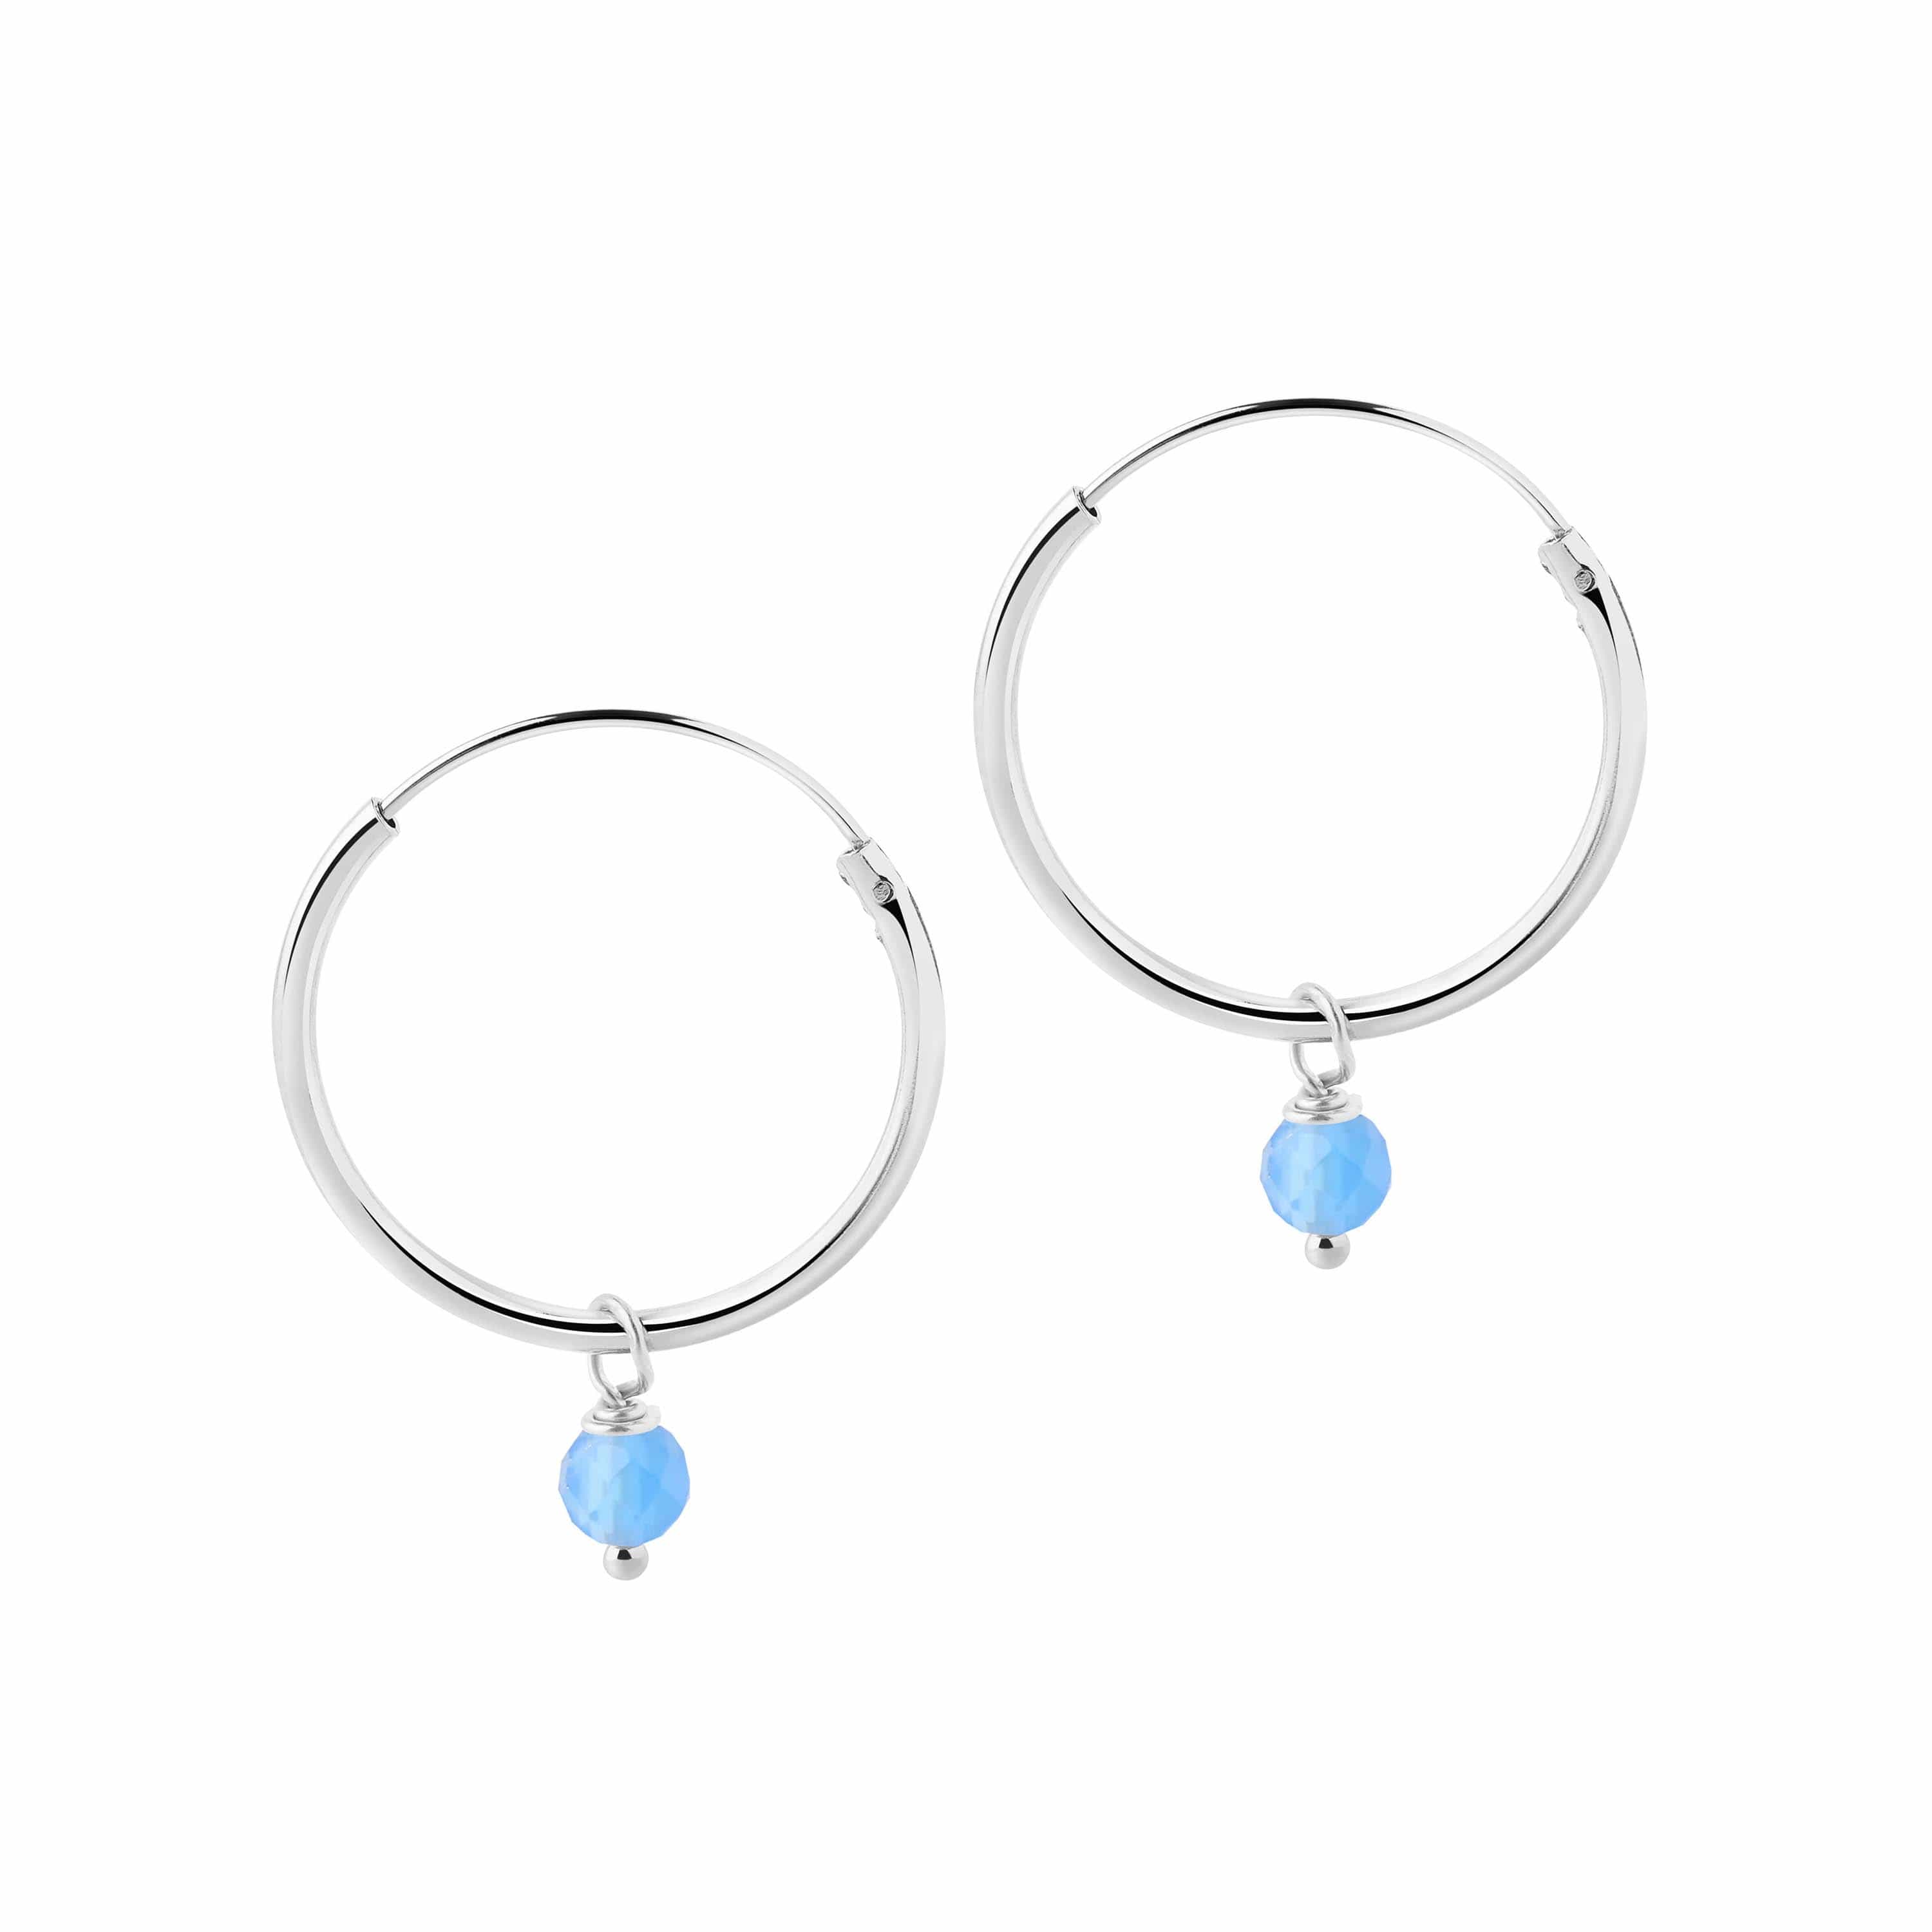 Small Silver Hoop Earrings with Blue Stone